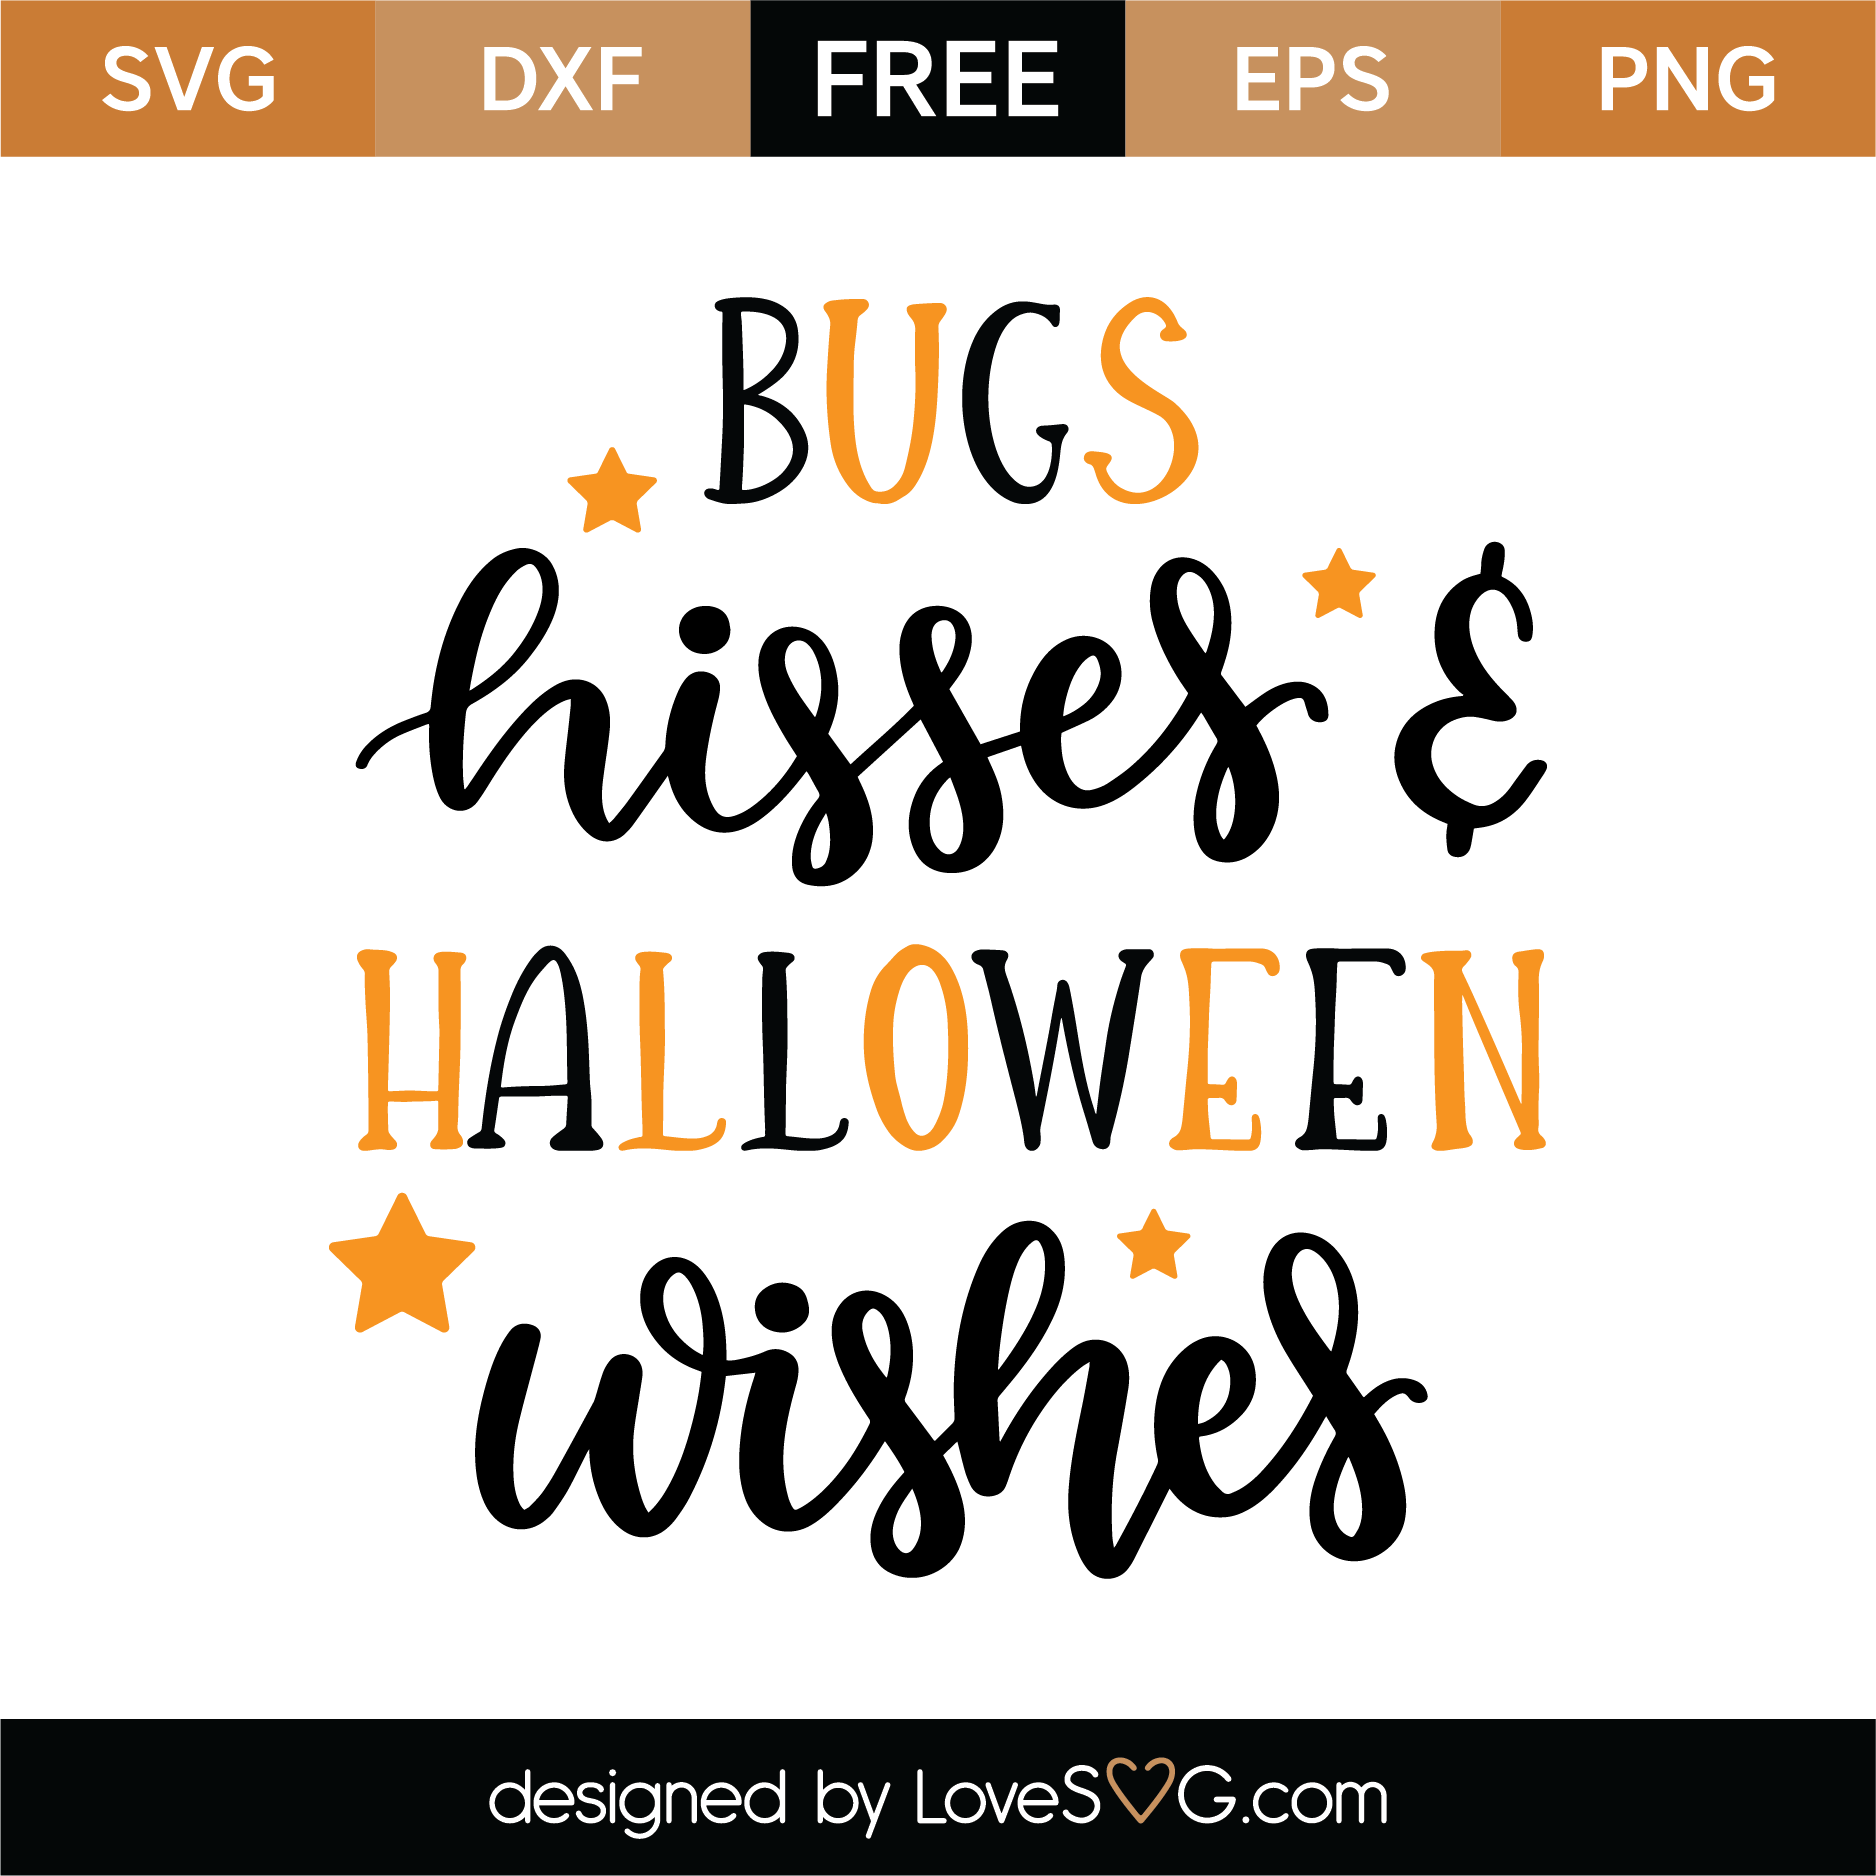 Download Free Bugs Kisses and Halloween Wishes SVG Cut File ...